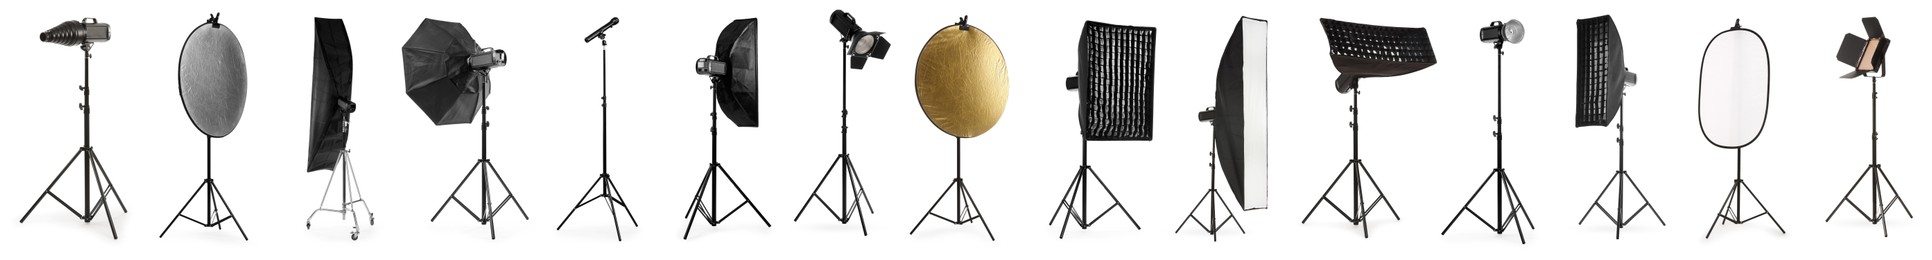 Set of different professional photo studio equipment isolated on white